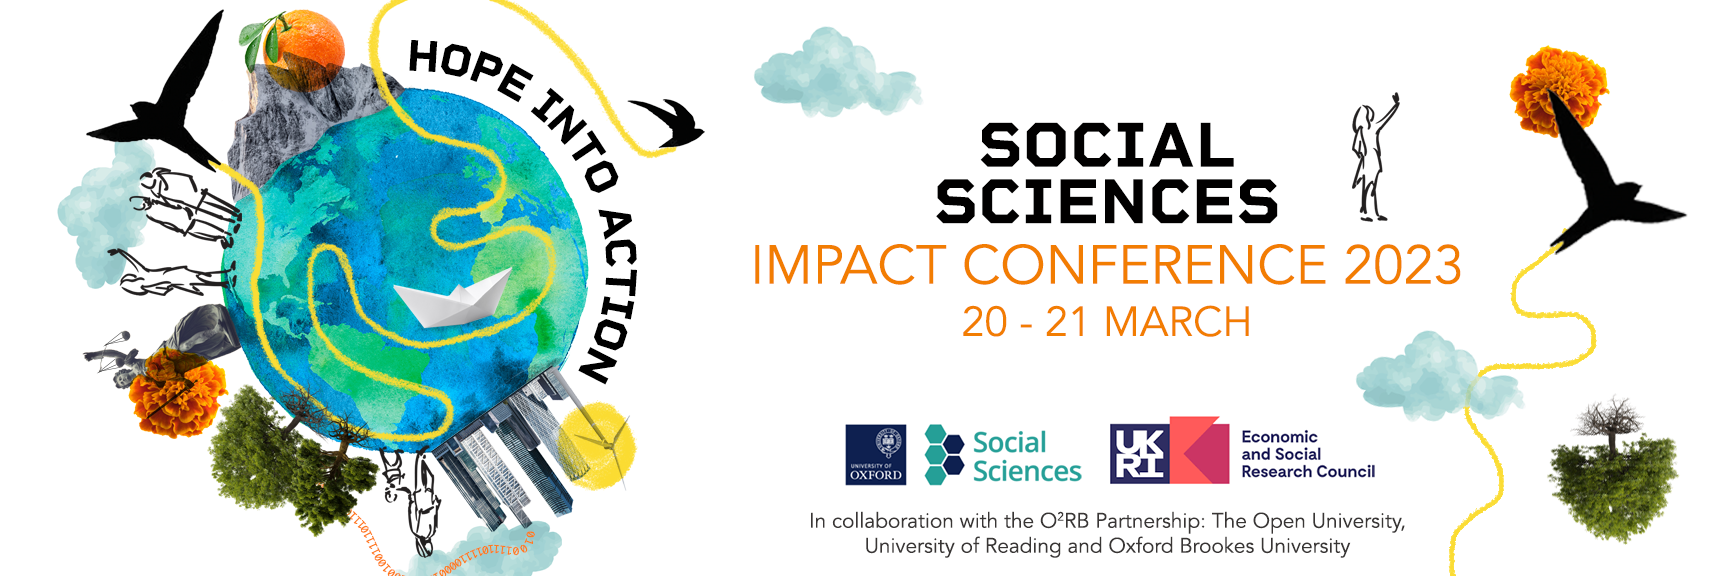 Colourful globe graphic. Hope into Action: Social Sciences Impact Conference 2023. Oxford Social Sciences & the UKRI Economic and Social Research Council, in collaboration with the O2RB Partnership: the Open Uni, Uni of Reading, and Oxford Brookes Uni.